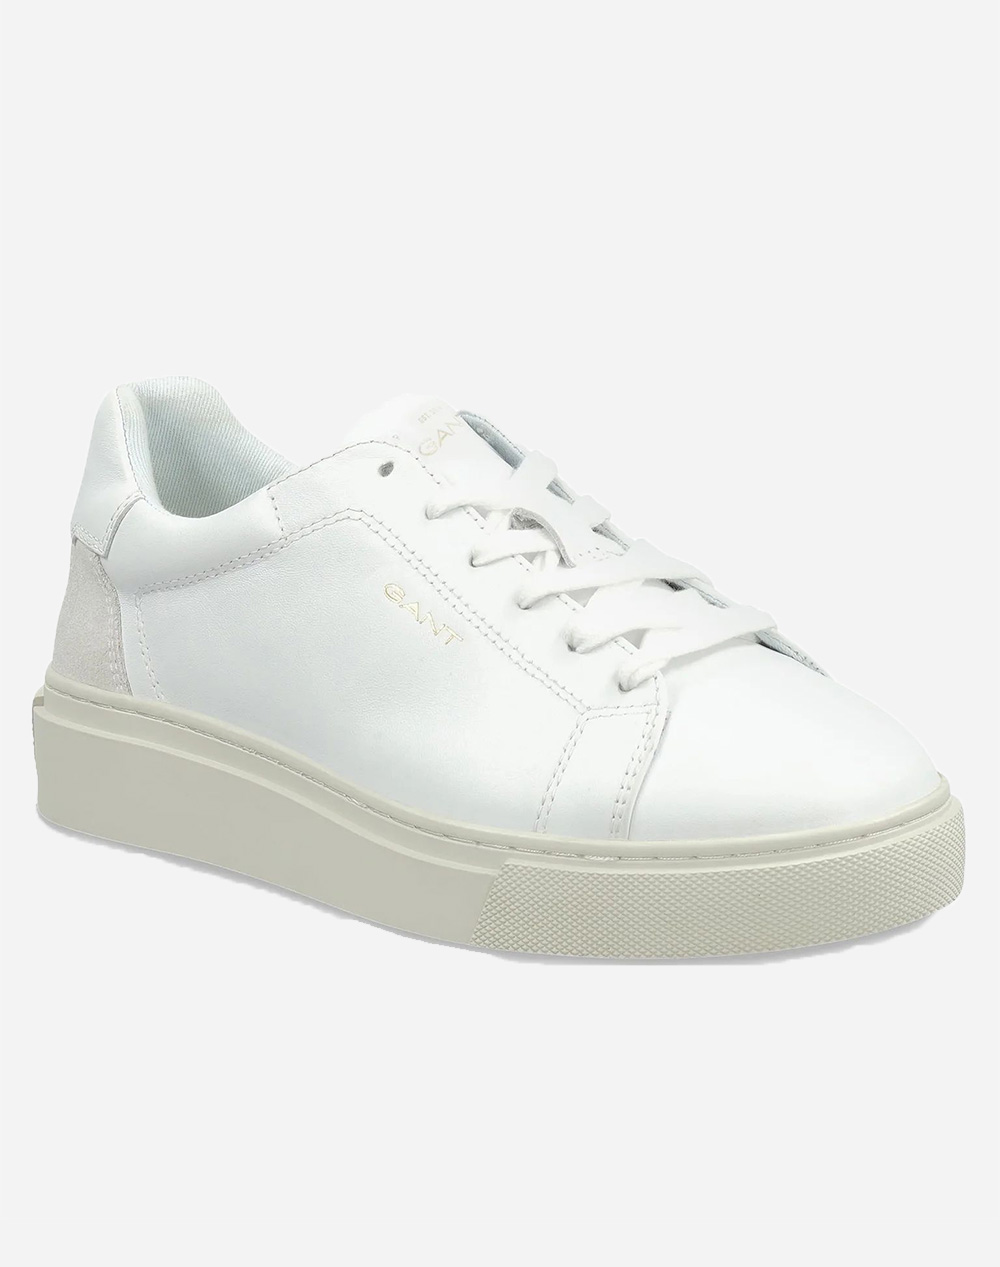 GANT WOMENS JULICE SHOES